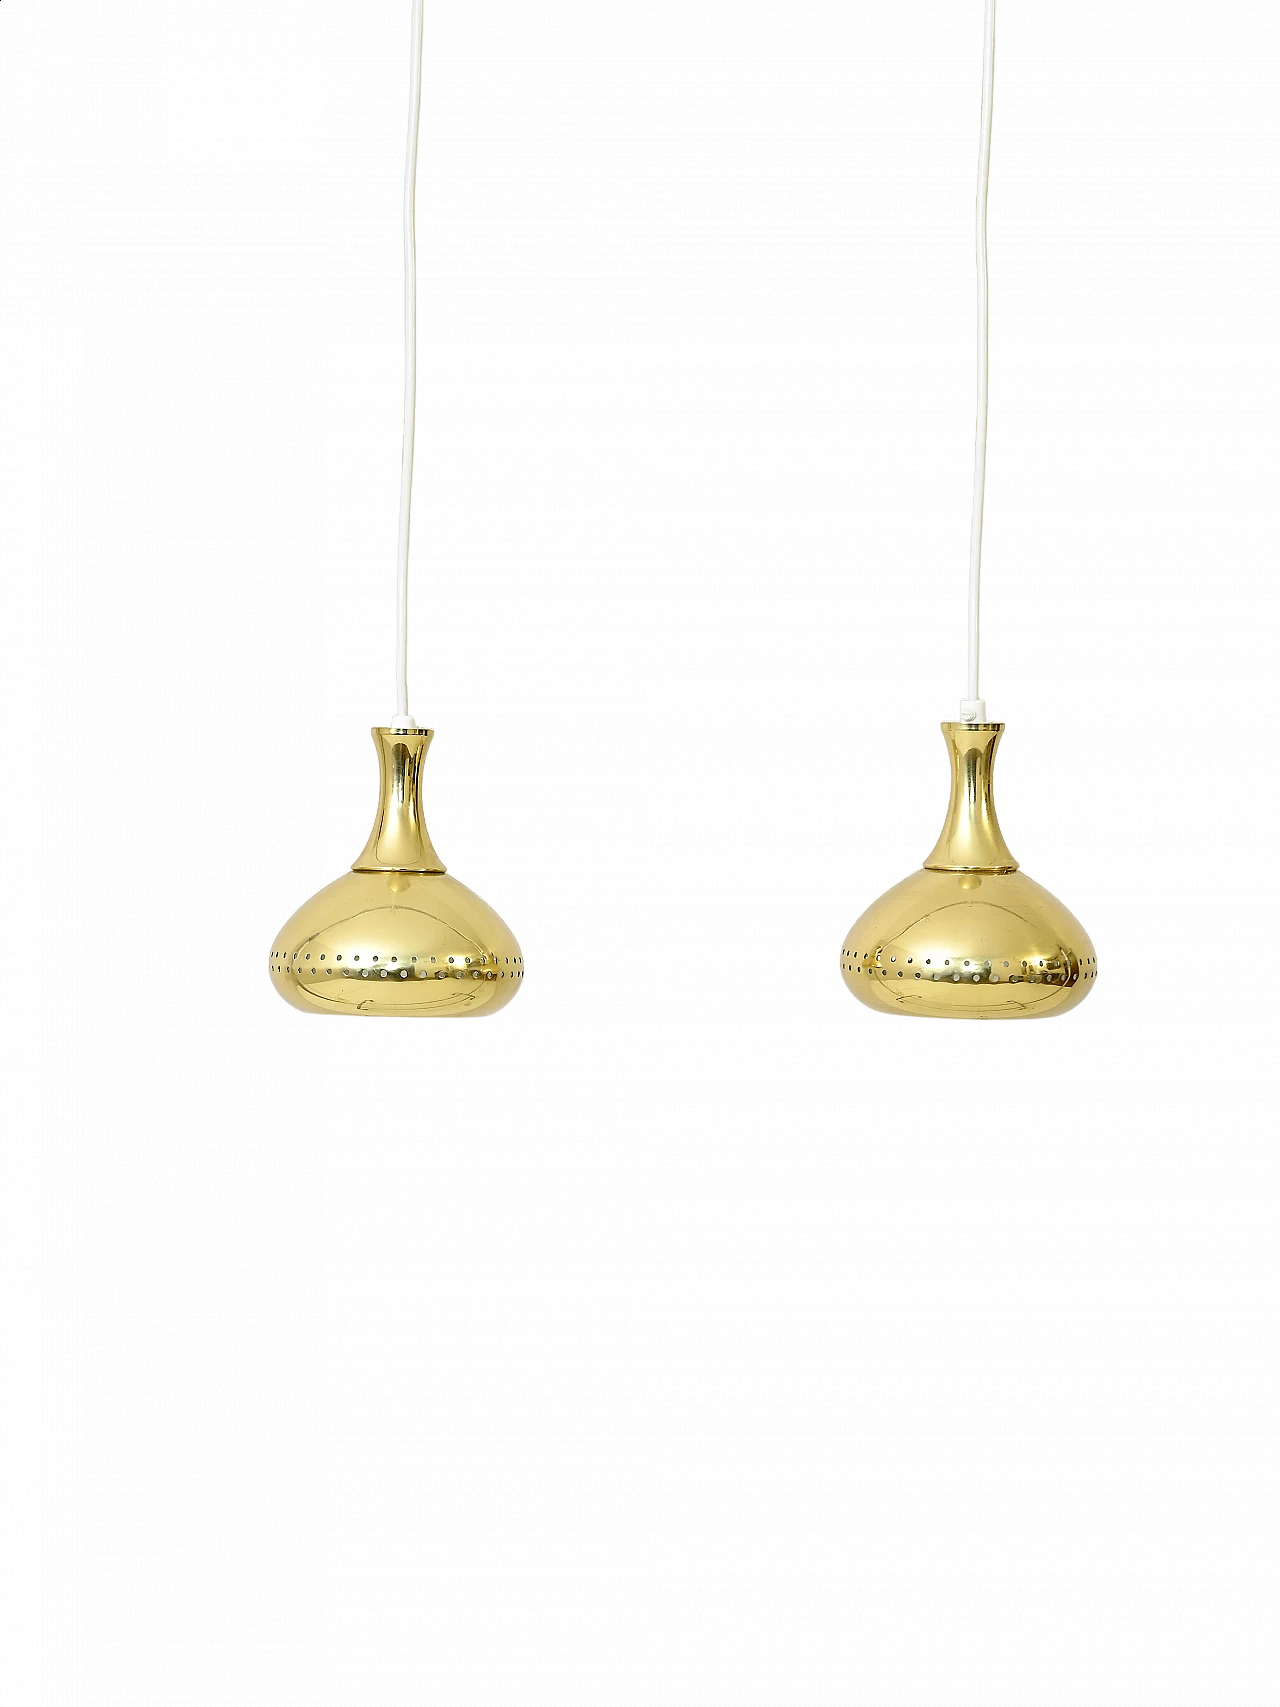 Pair of brass pendant lamps by Hans-Agne Jakobsson for Markaryd, 1950s 21